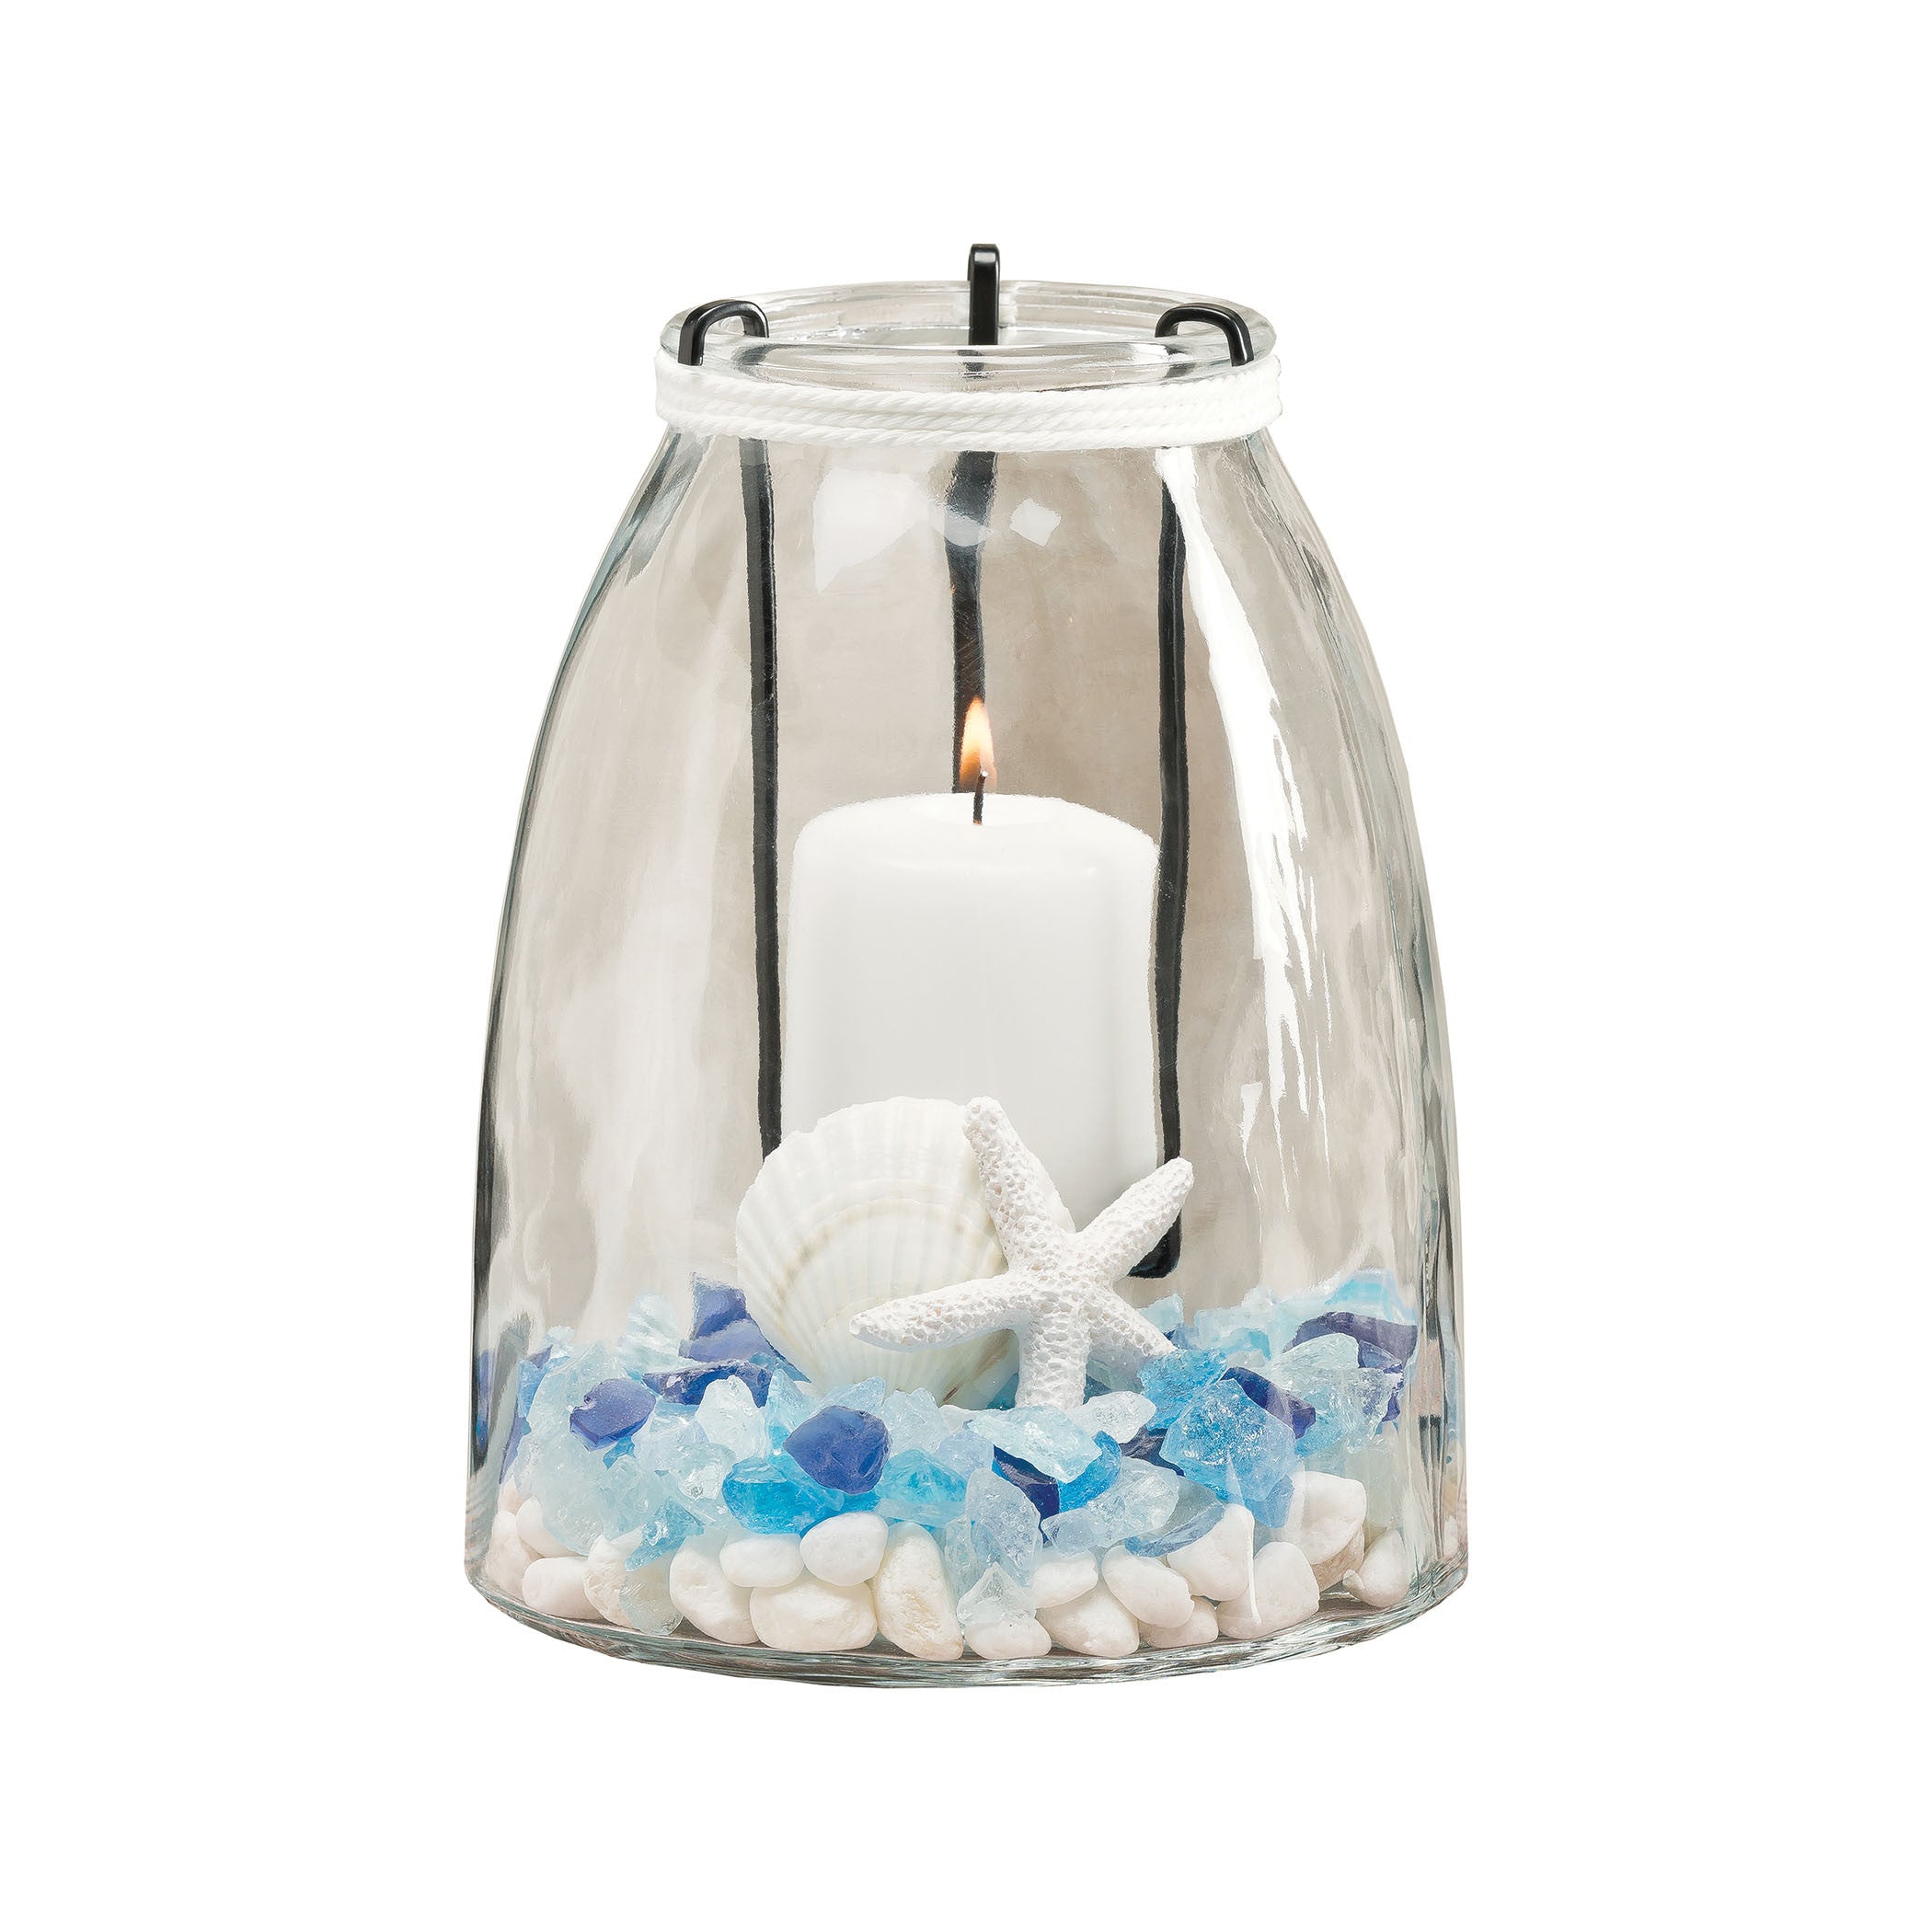 Pomeroy Pom-291005 Oceana Collection Rustic,clear Finish Candle/candle Holder